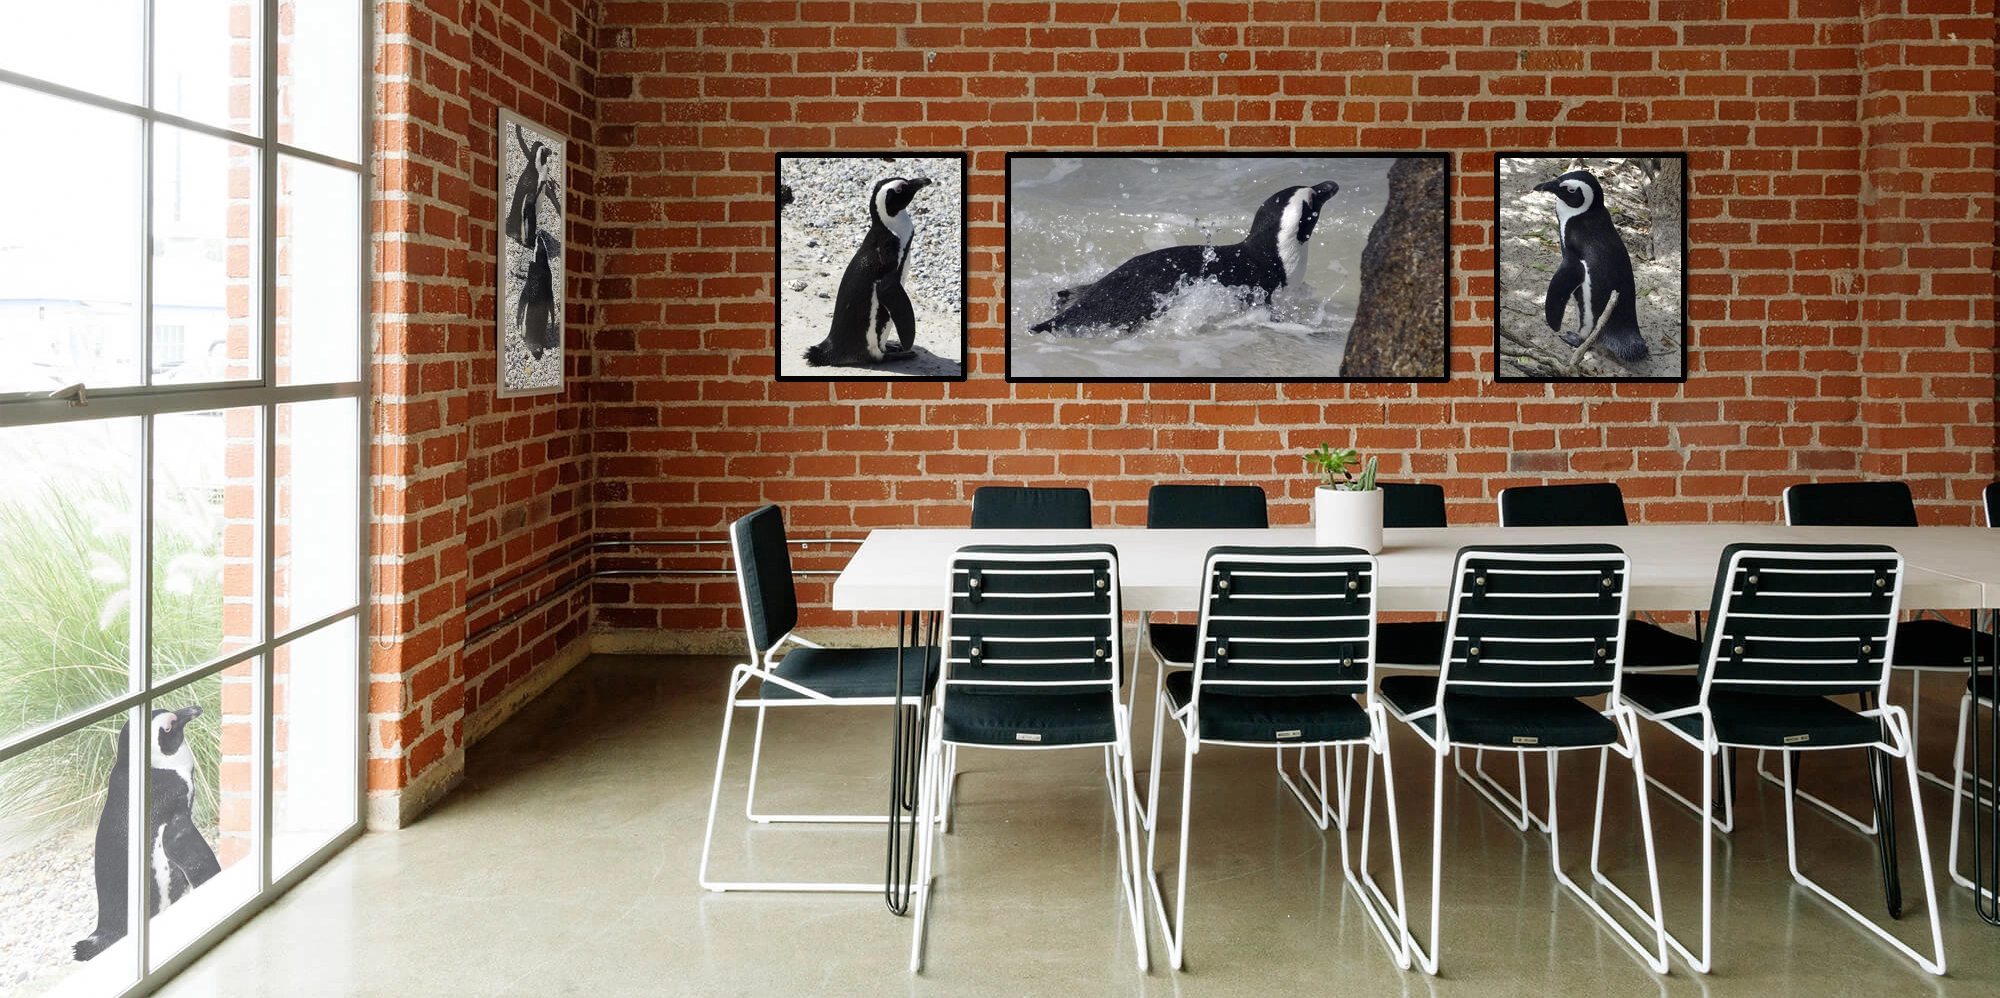 peter segasby photographer creating beautiful images of penguins for interior